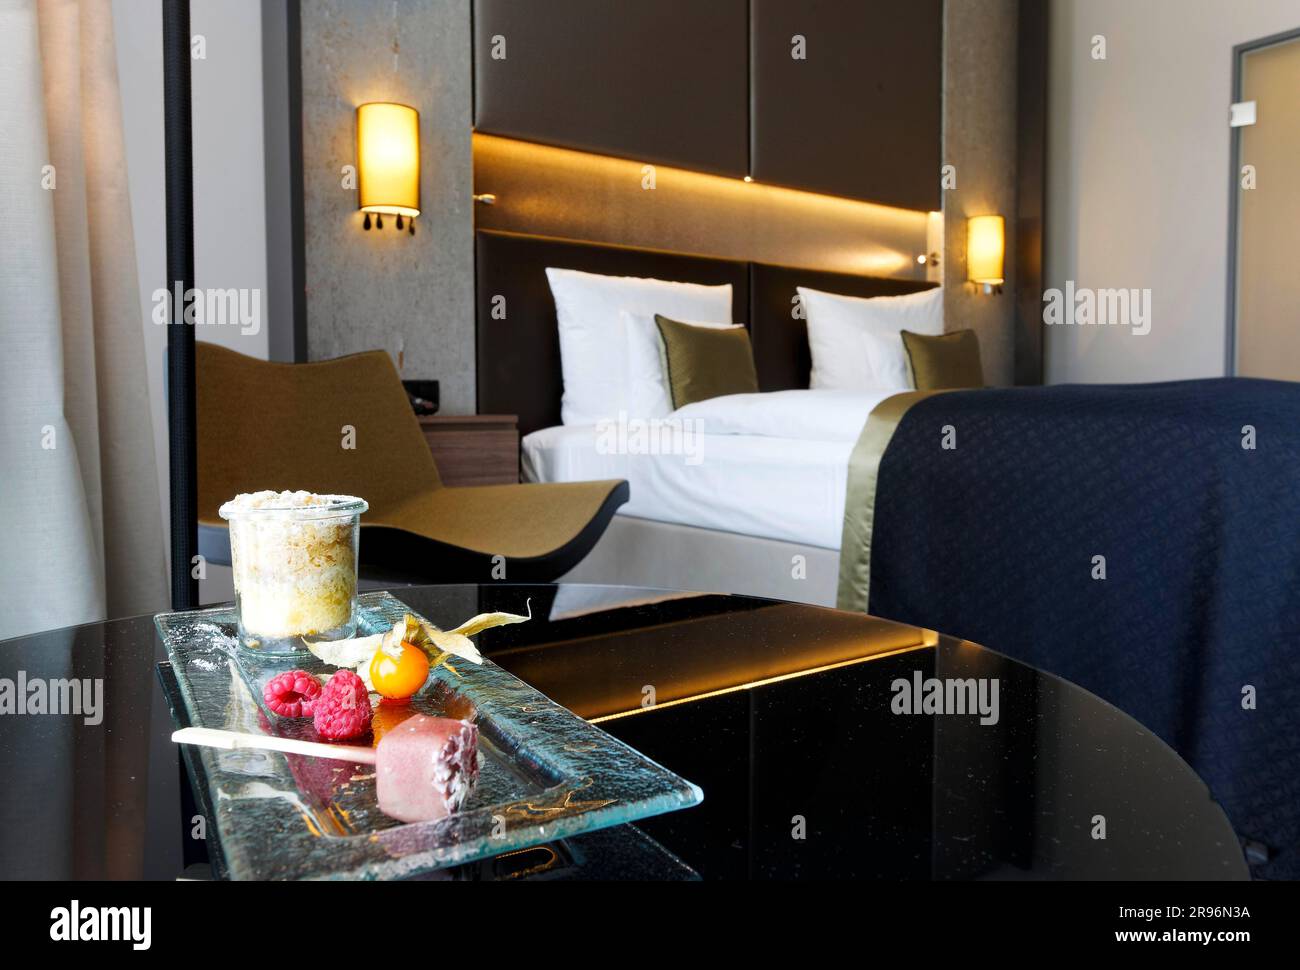 Guest rooms at the Hotel Steigenberger Berlin, Germany Stock Photo